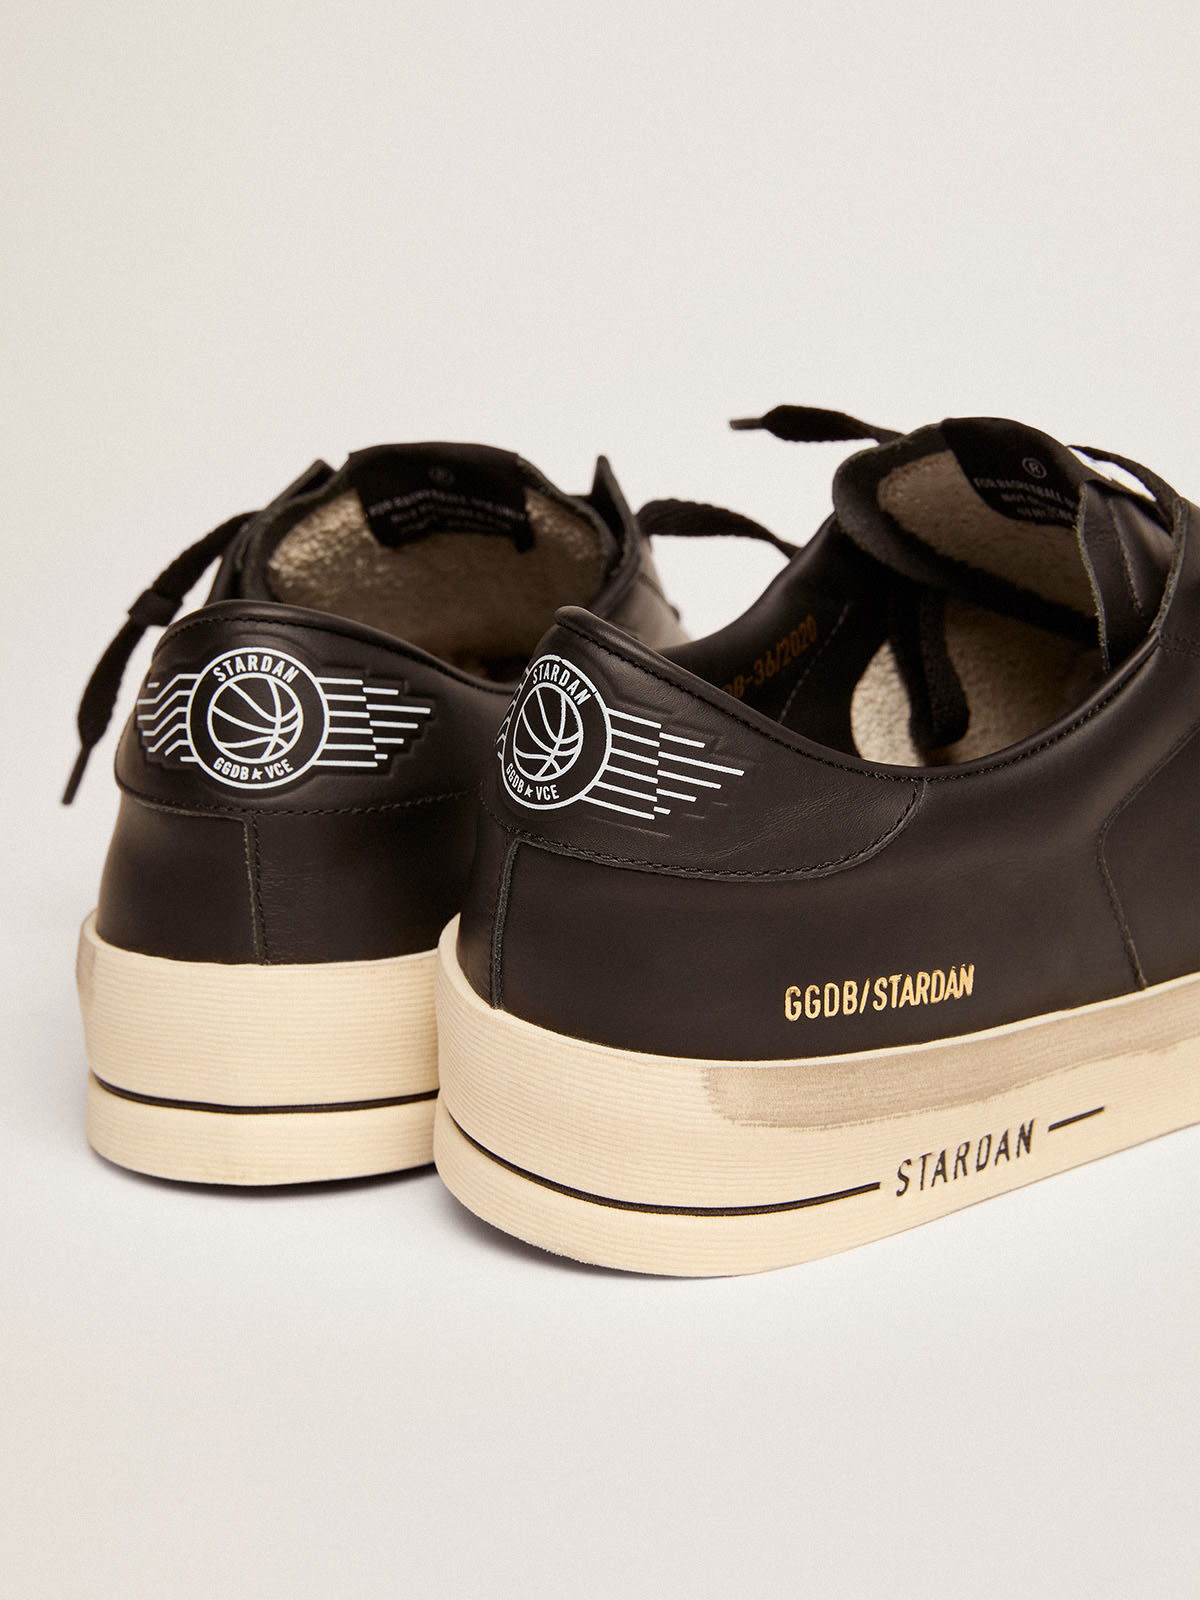 Golden Goose - Stardan sneakers in total black leather with vintage finish in 